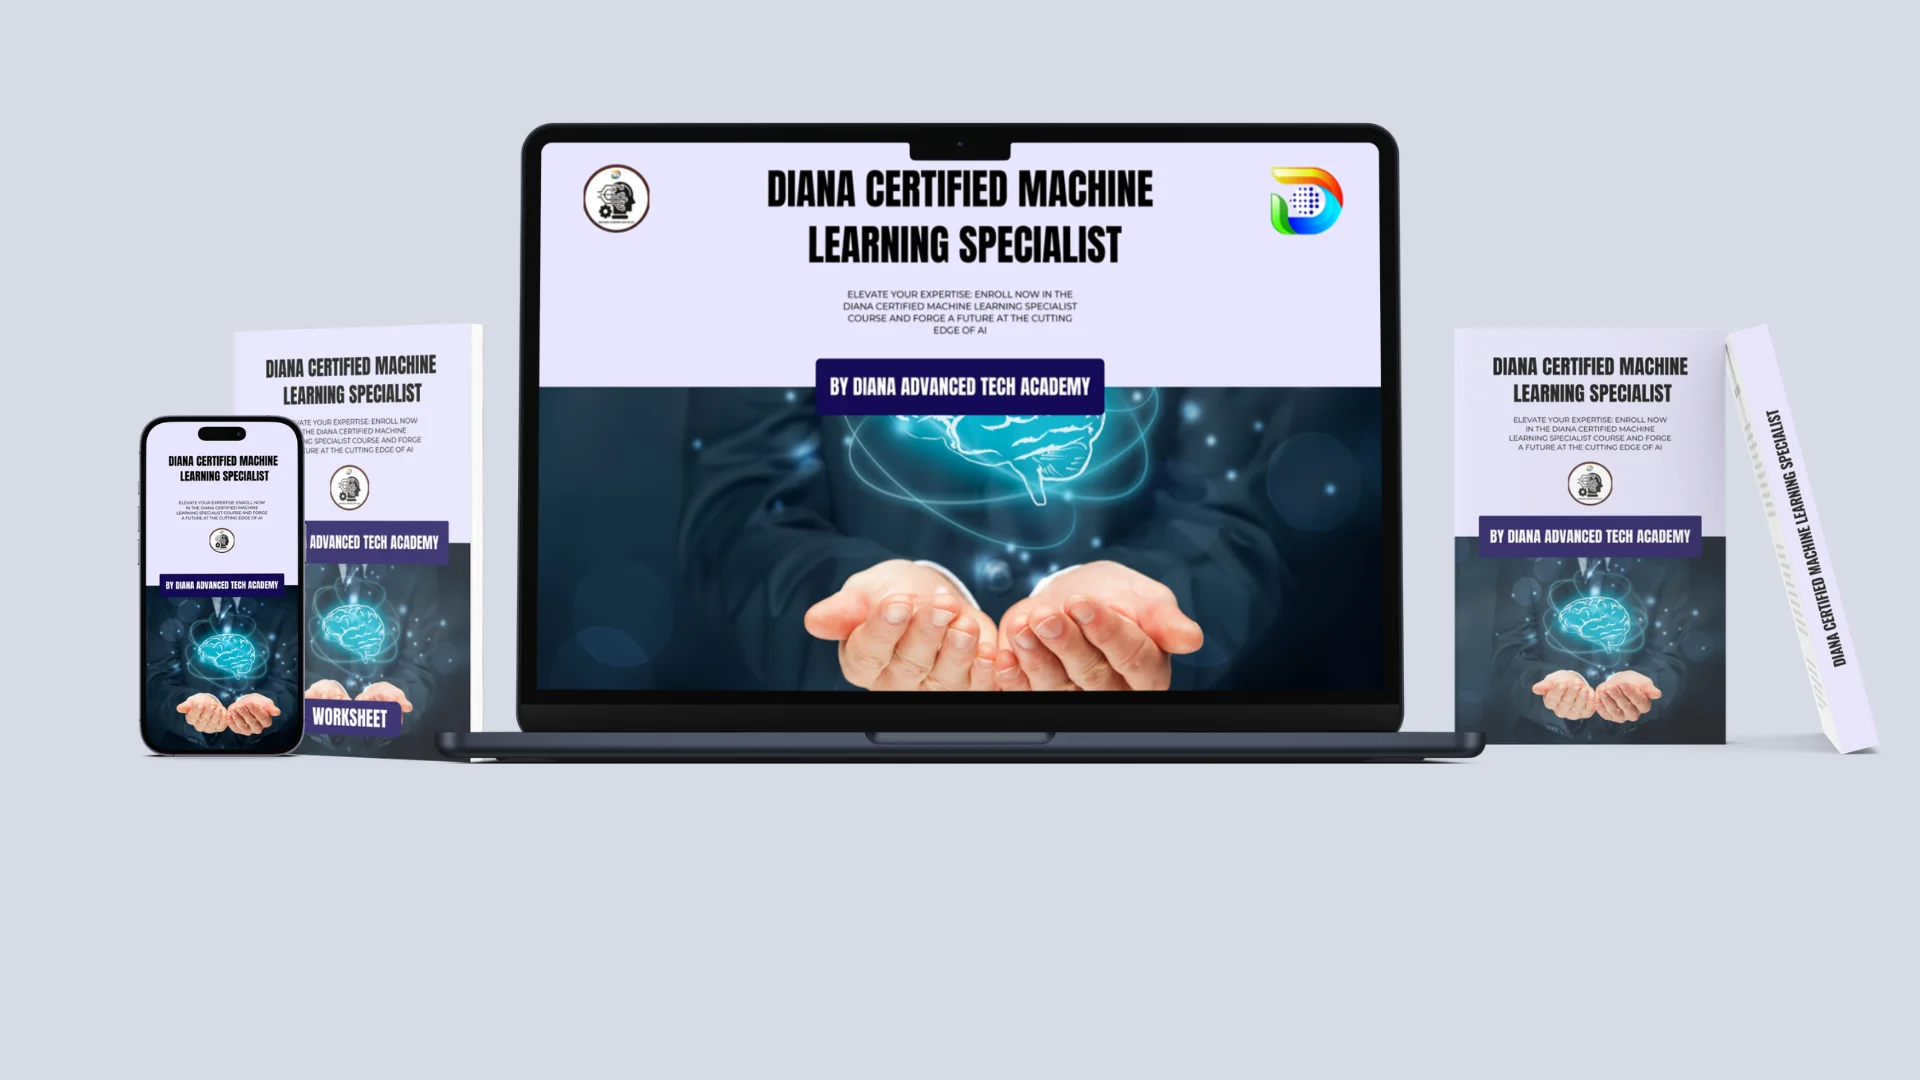 Diana Certified Machine Learning Specialist